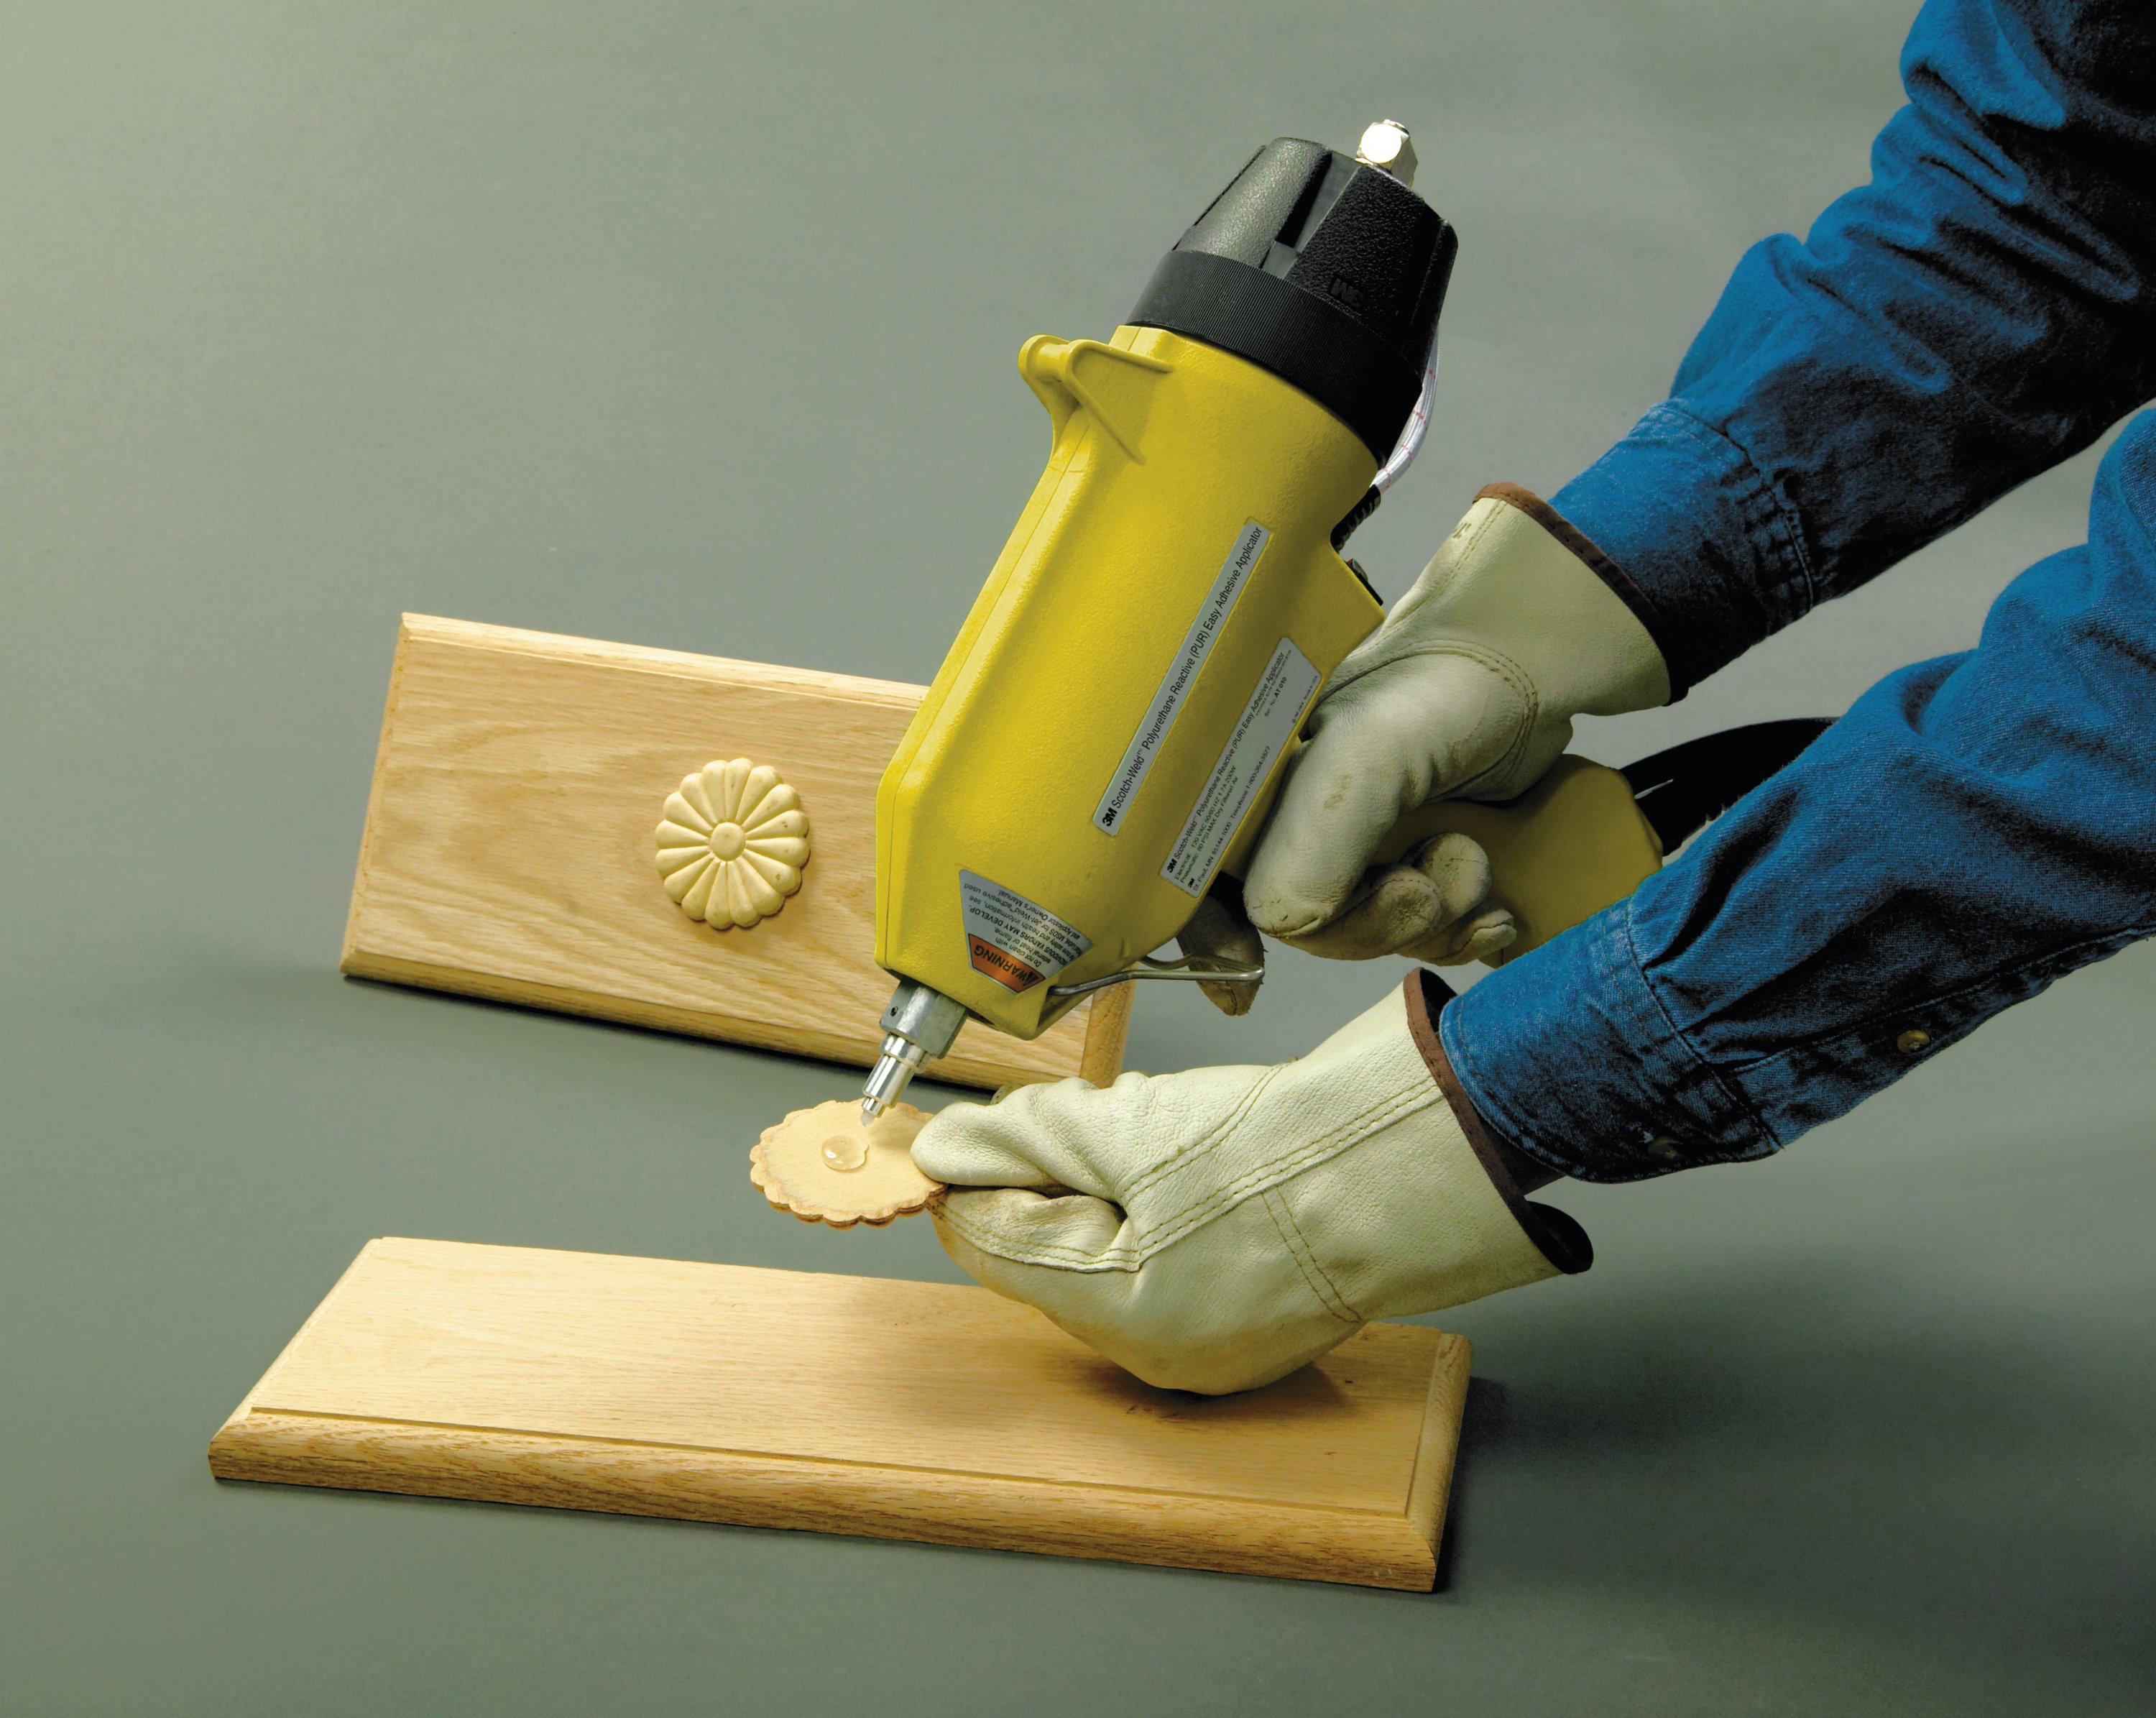 3M™ Scotch-Weld ™ PUR Adhesives are one-component, moisture-curing urethane adhesives that are applied warm to create dramatically strong bonds to a variety of substrates such as wood, fiber reinforced plastic (FRP) and many other plastics to themselves, to metal and to glass.